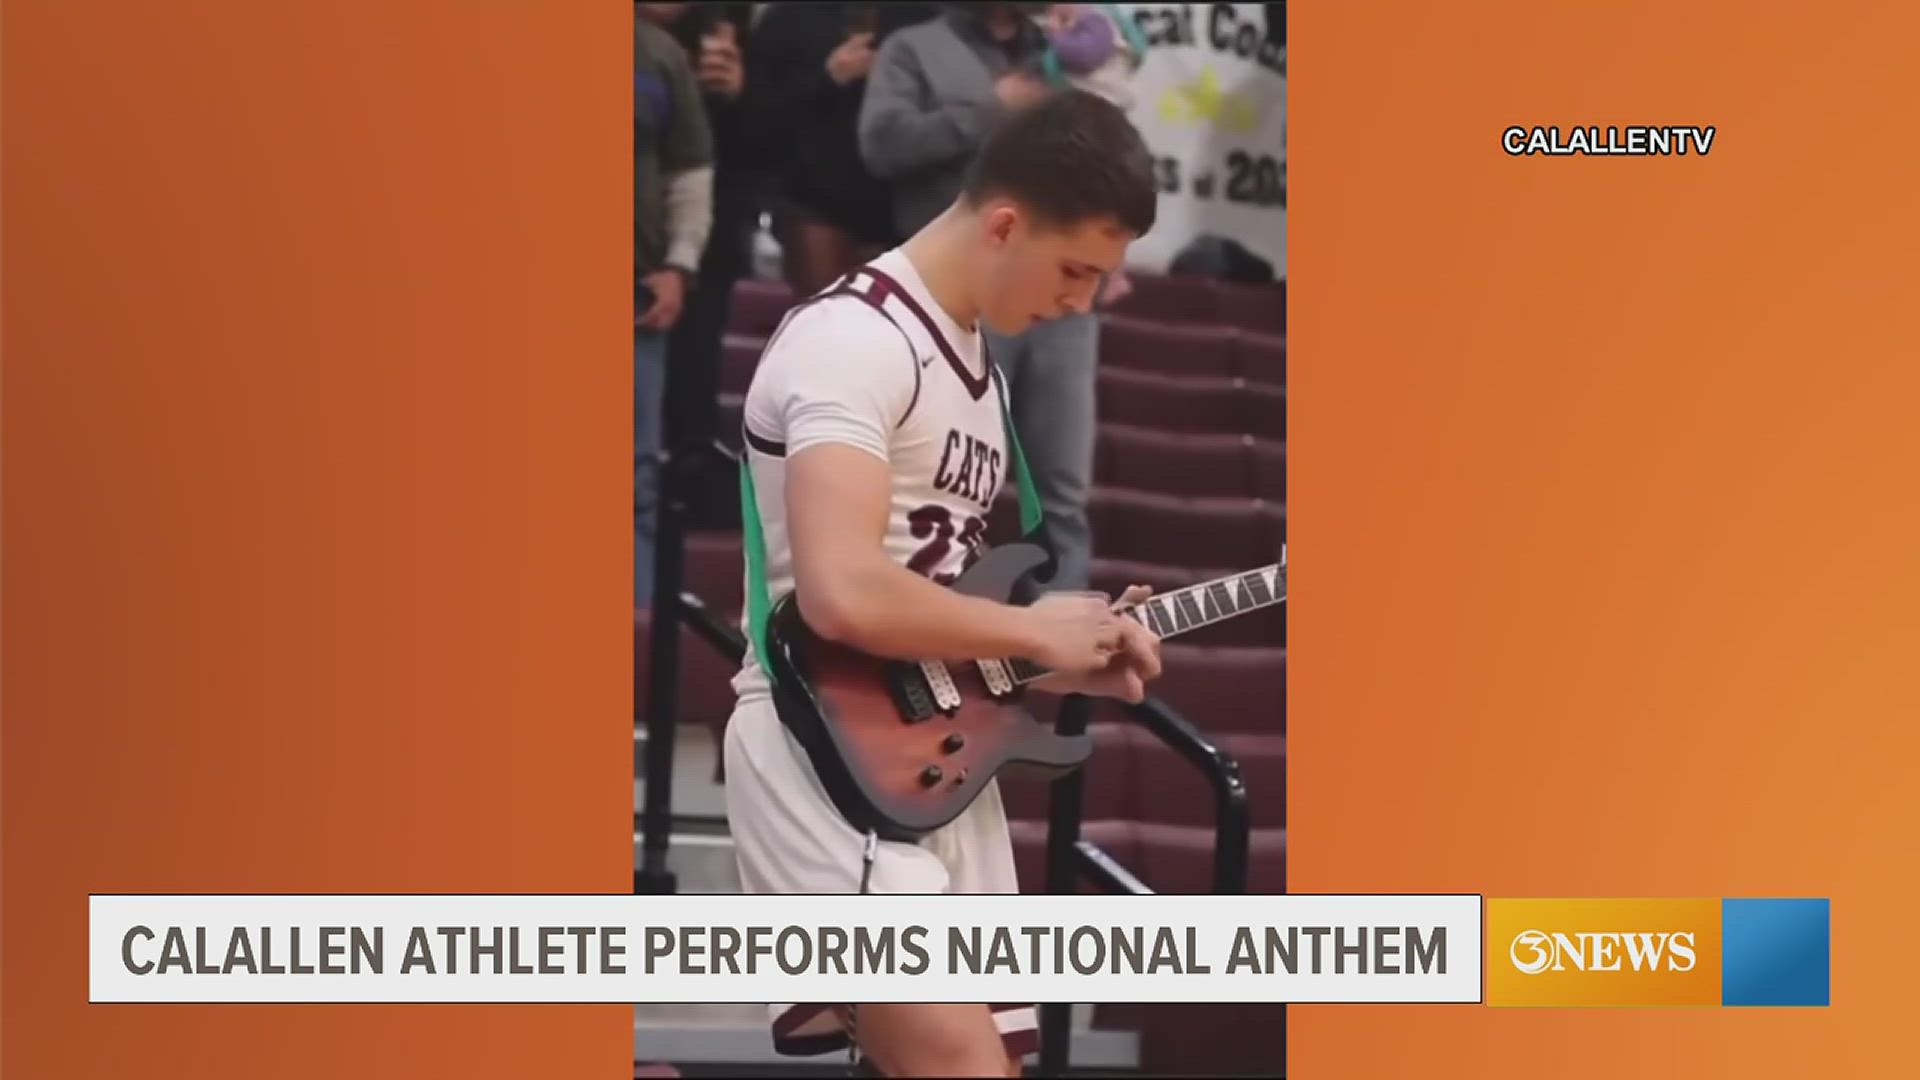 The post of Andrew Logan, a senior at Calallen High School, playing the National Anthem on his electric guitar has more than 653K views online.